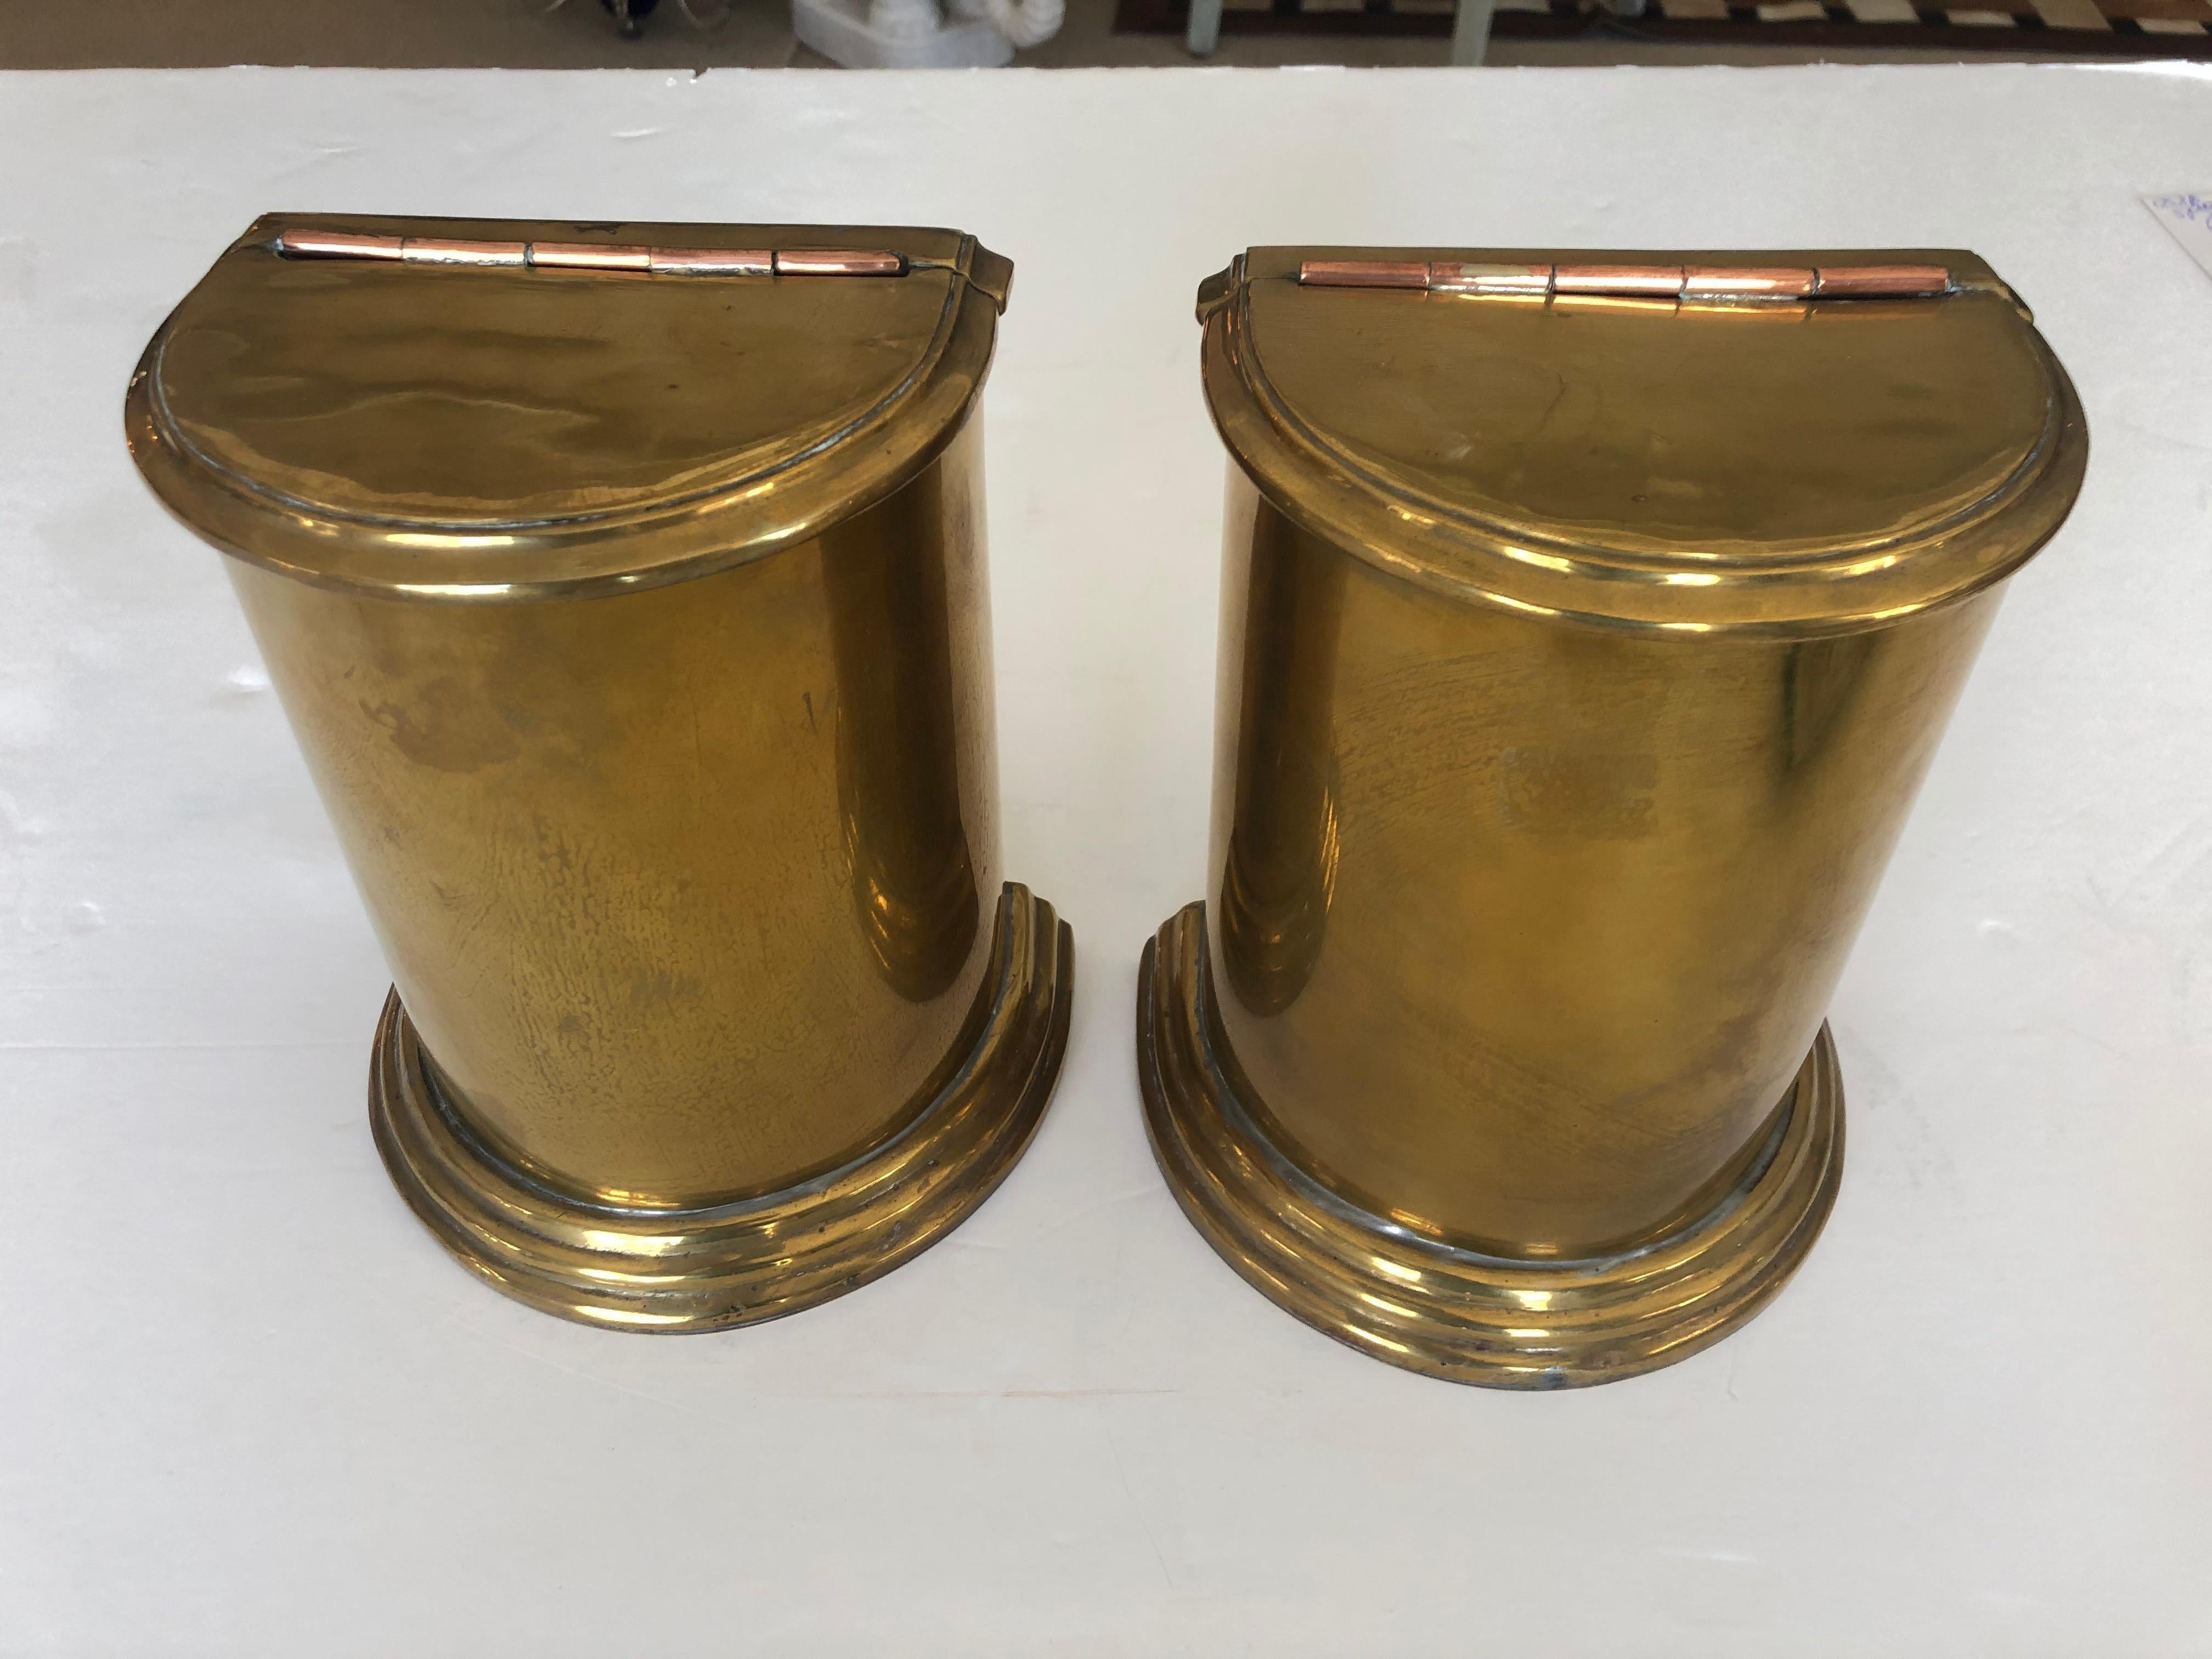 Handsome Pair of Antique English Cast Brass and Copper Bookends For Sale 3